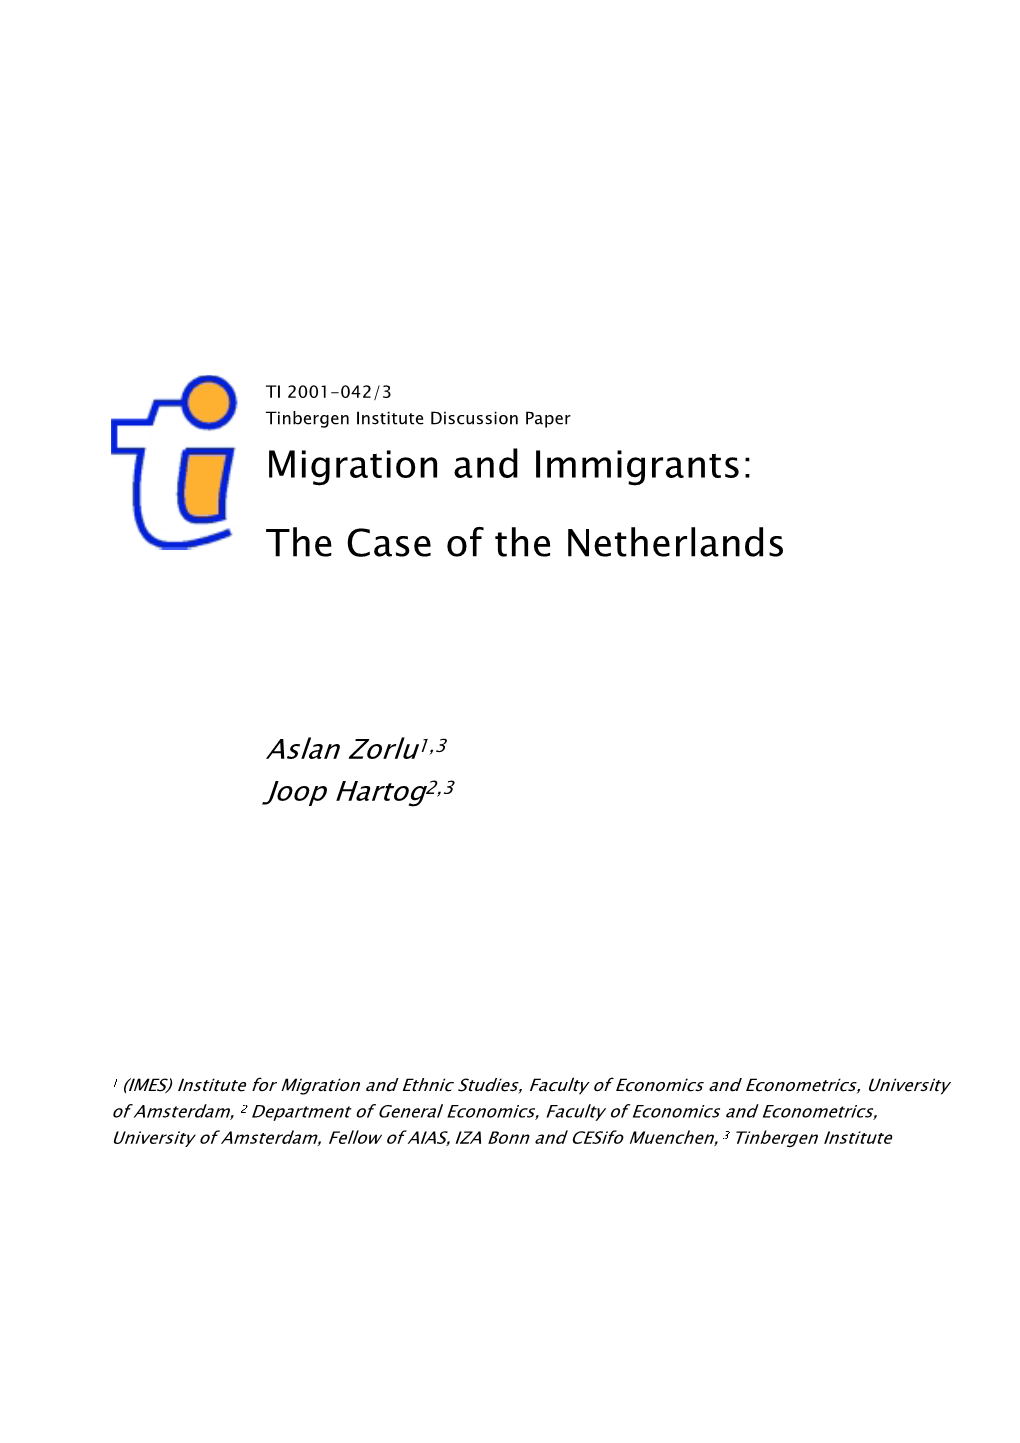 Migration and Immigrants: the Case of the Netherlands